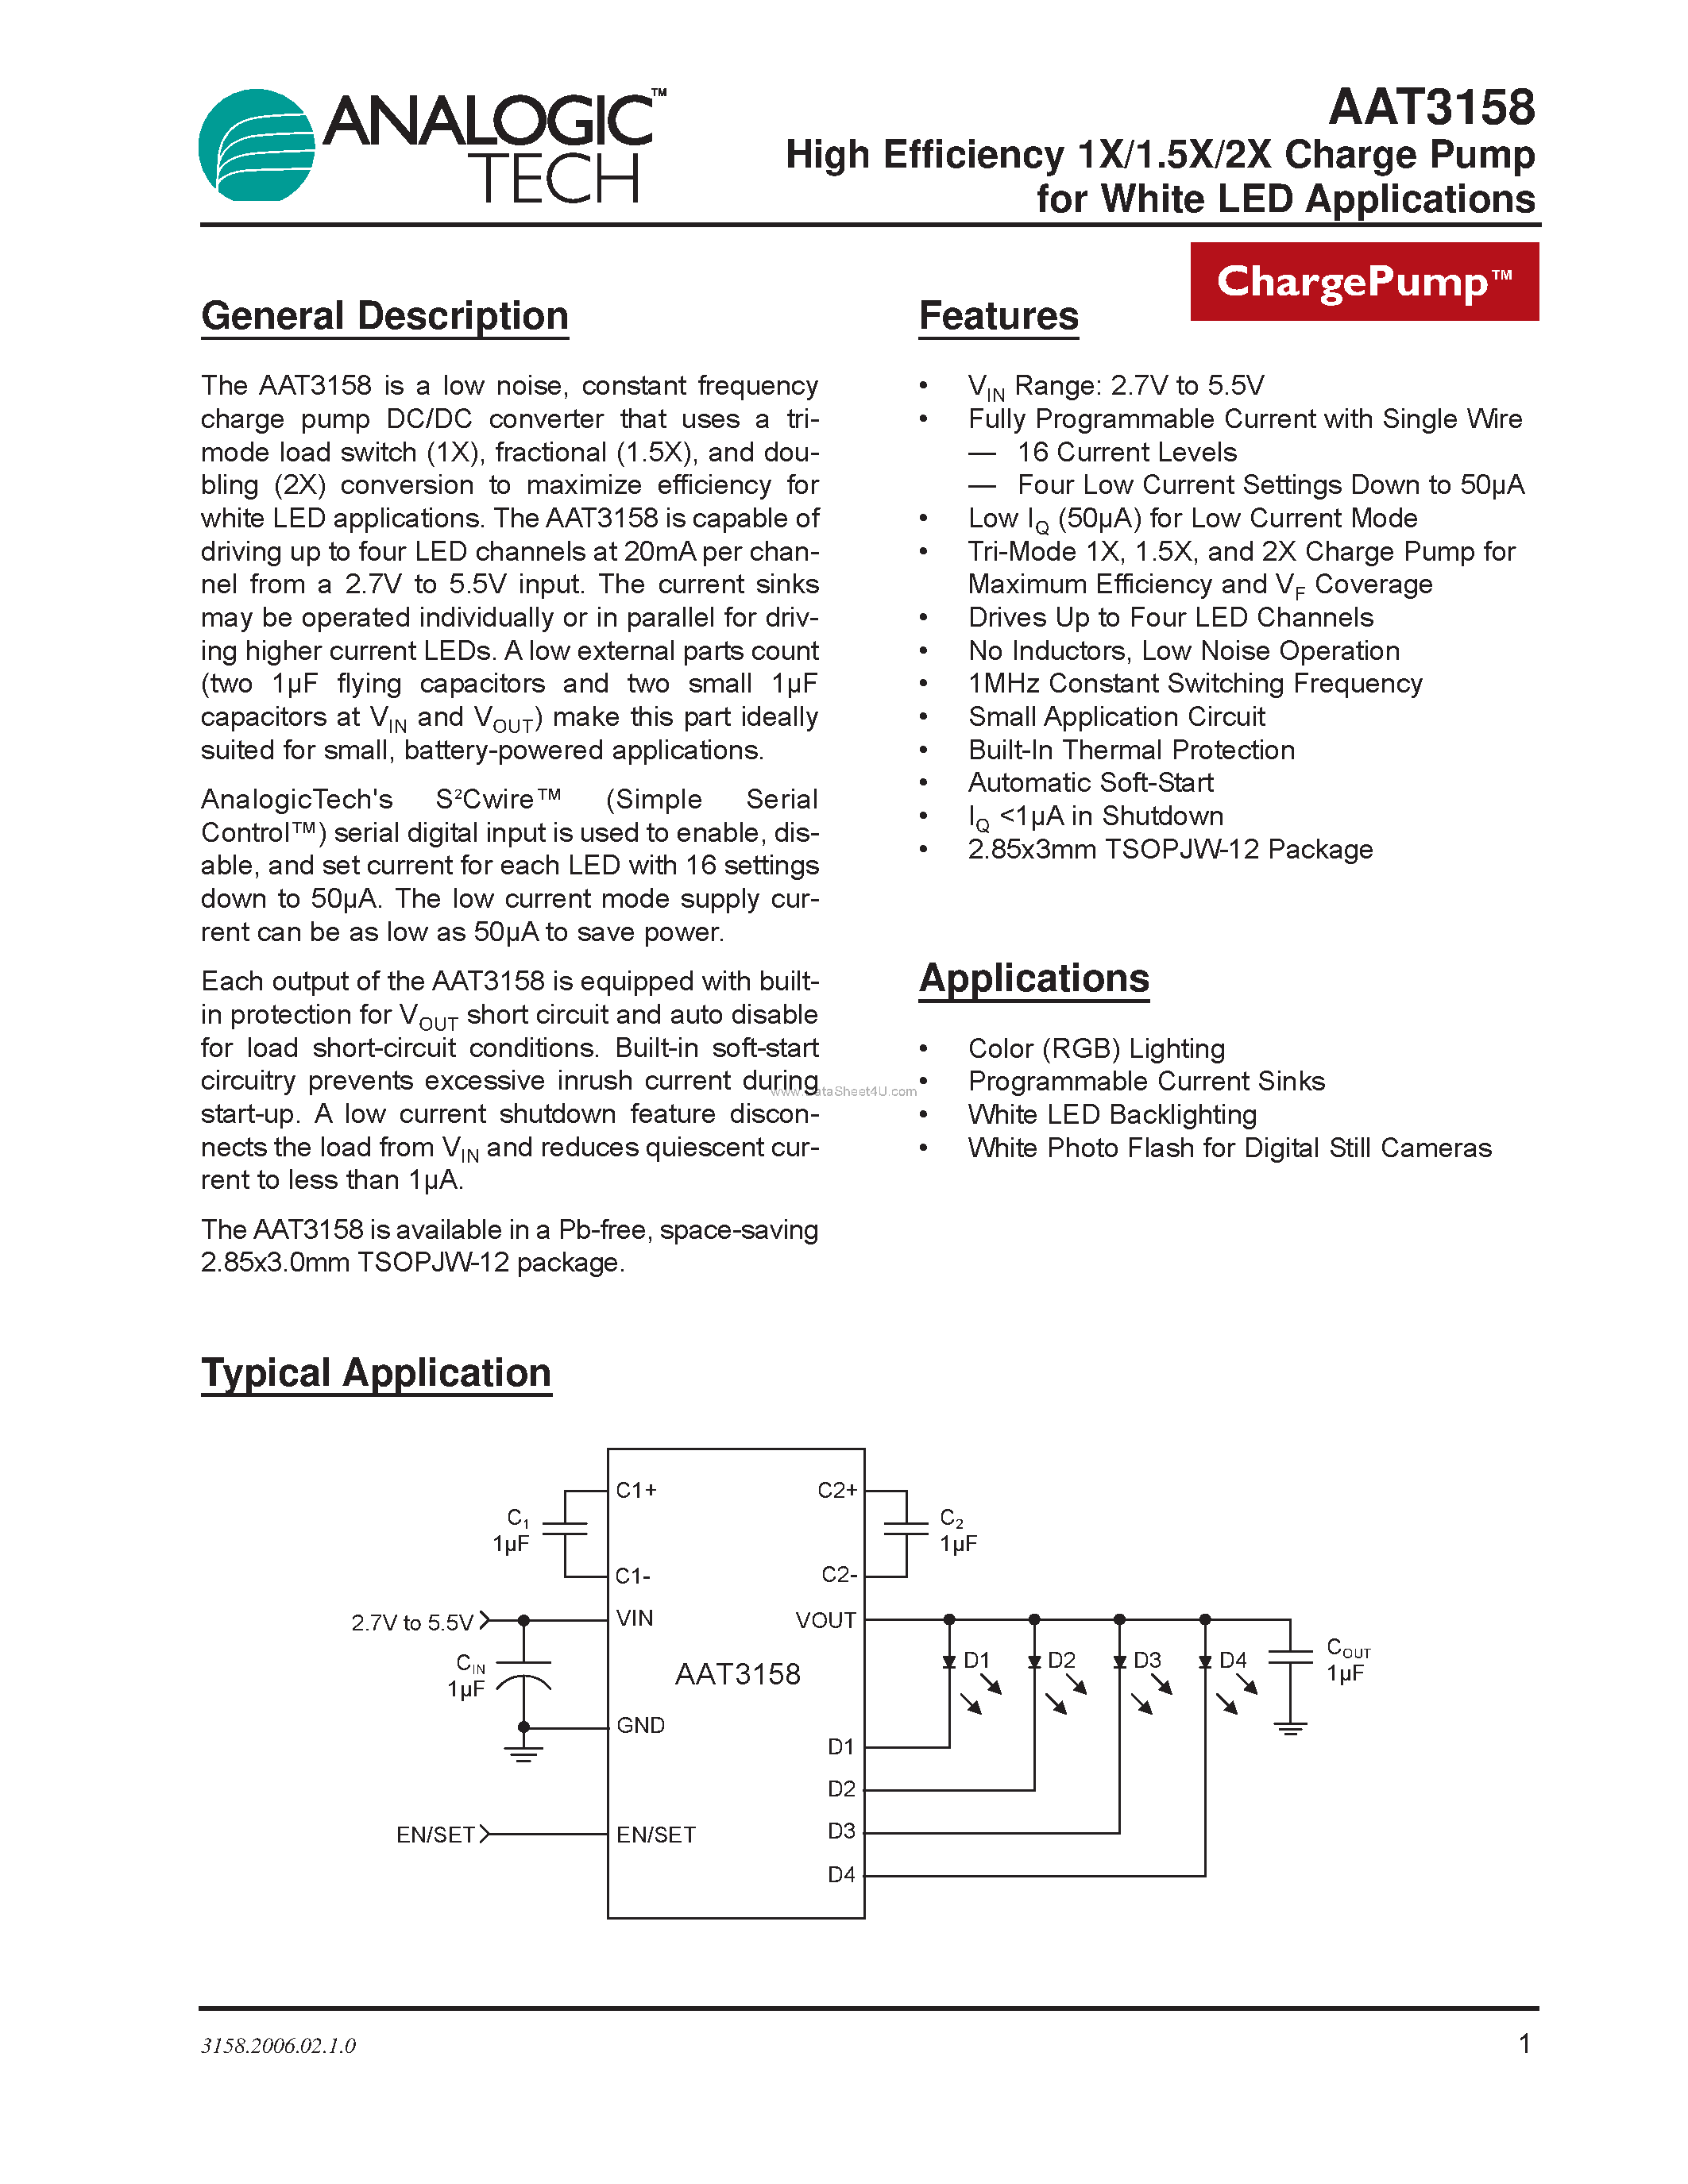 Datasheet AAT3158 - High Efficiency 1X/1.5X/2X Charge Pump page 1